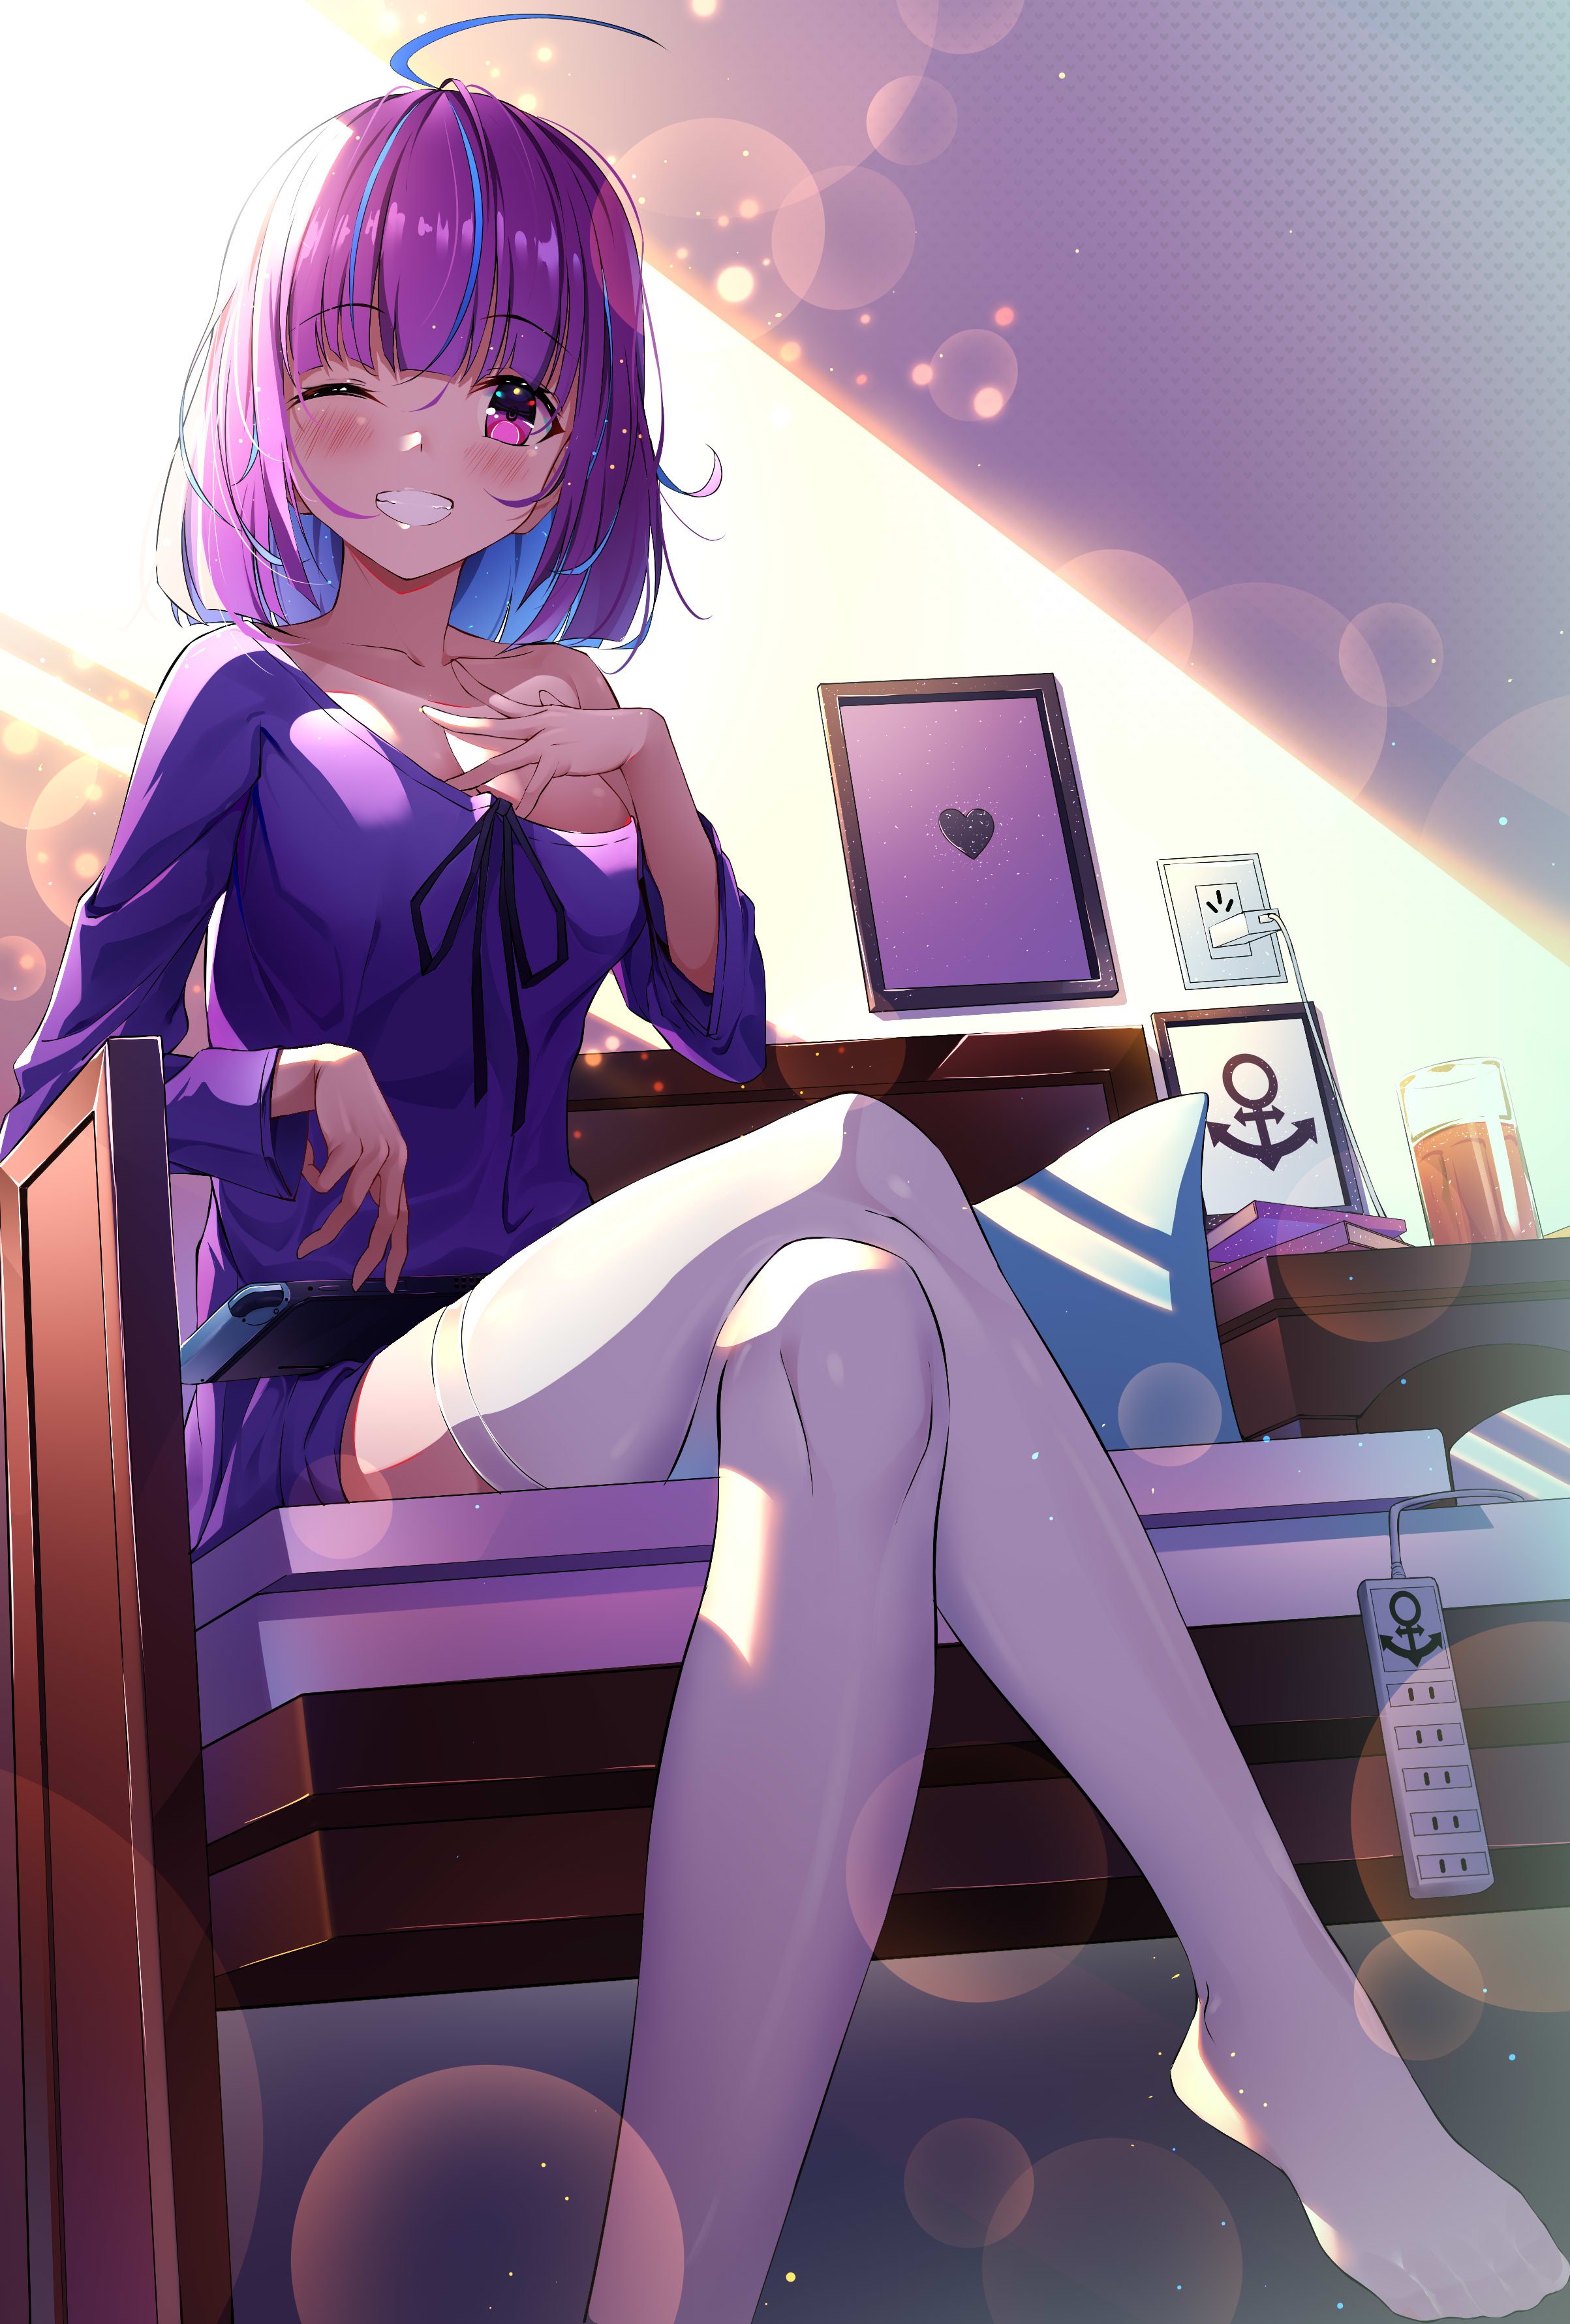 Anime 2406x3561 anime anime girls digital art artwork portrait display Hololive Virtual Youtuber Minato Aqua Cqingwei purple hair purple eyes wink smiling thigh-highs low-angle bare shoulders cleavage legs crossed sitting indoors women indoors thighs hand(s) on chest looking at viewer